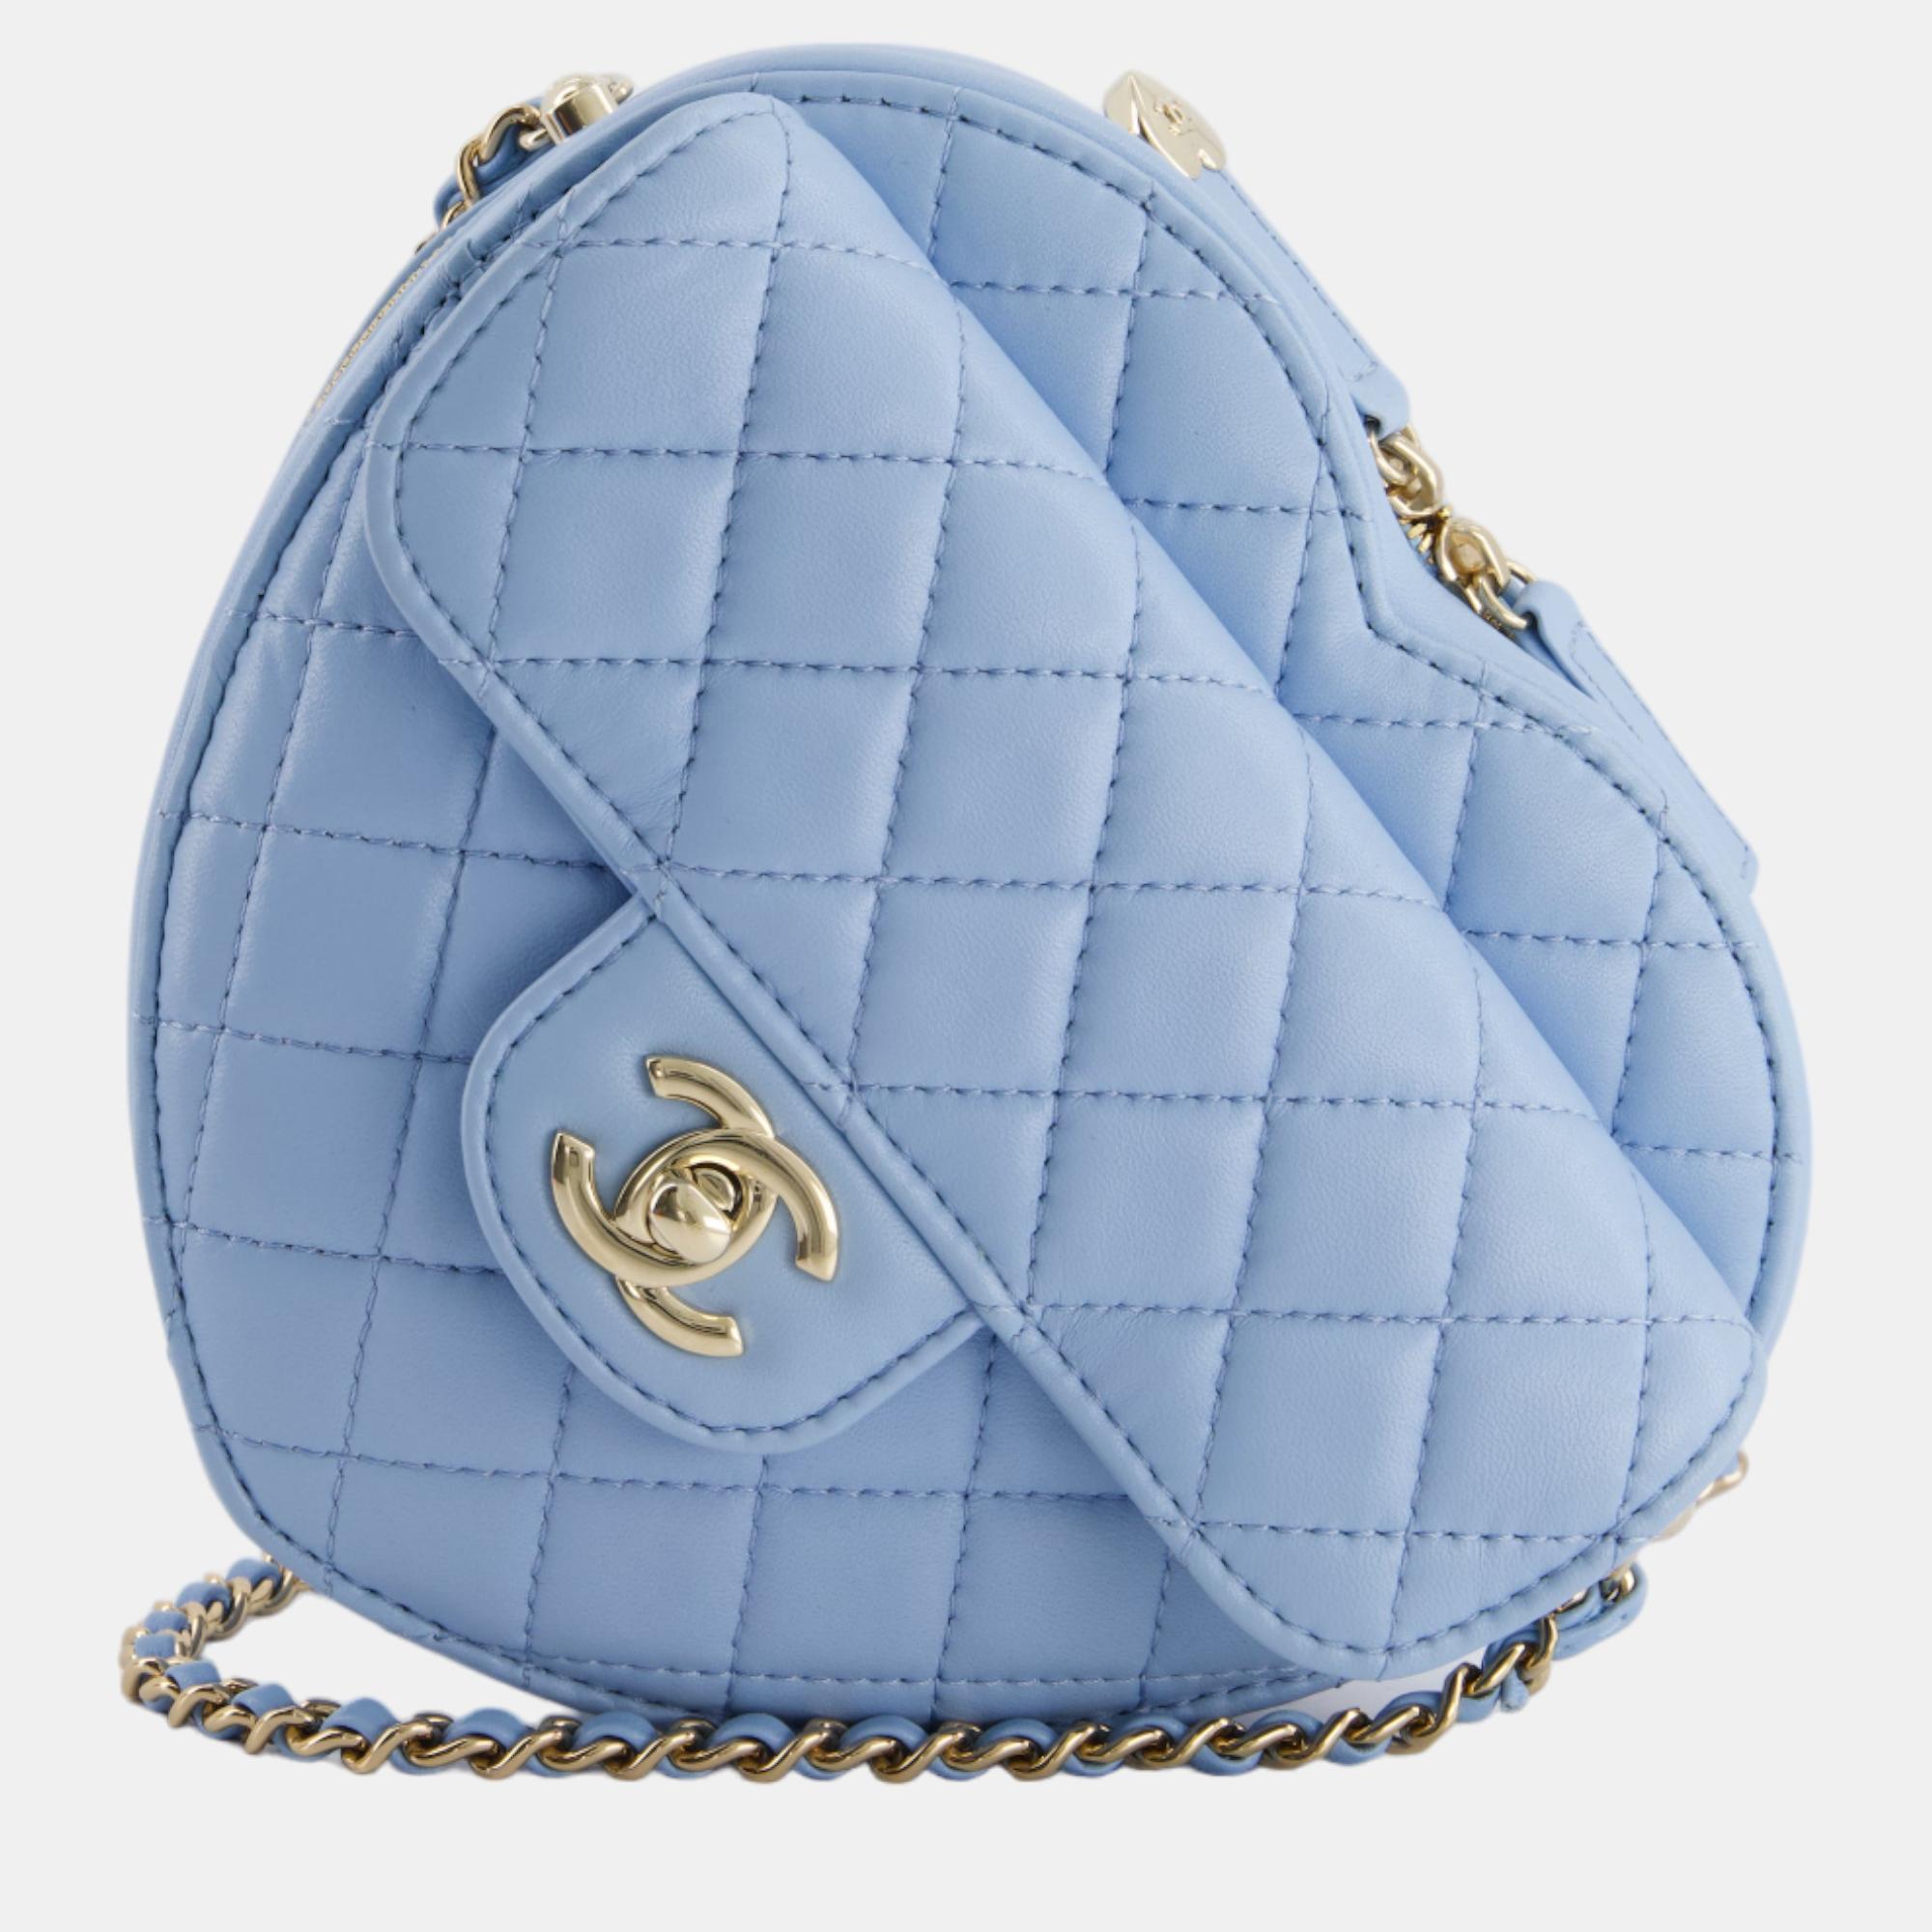 Chanel baby blue heart clutch with chain and champagne gold hardware